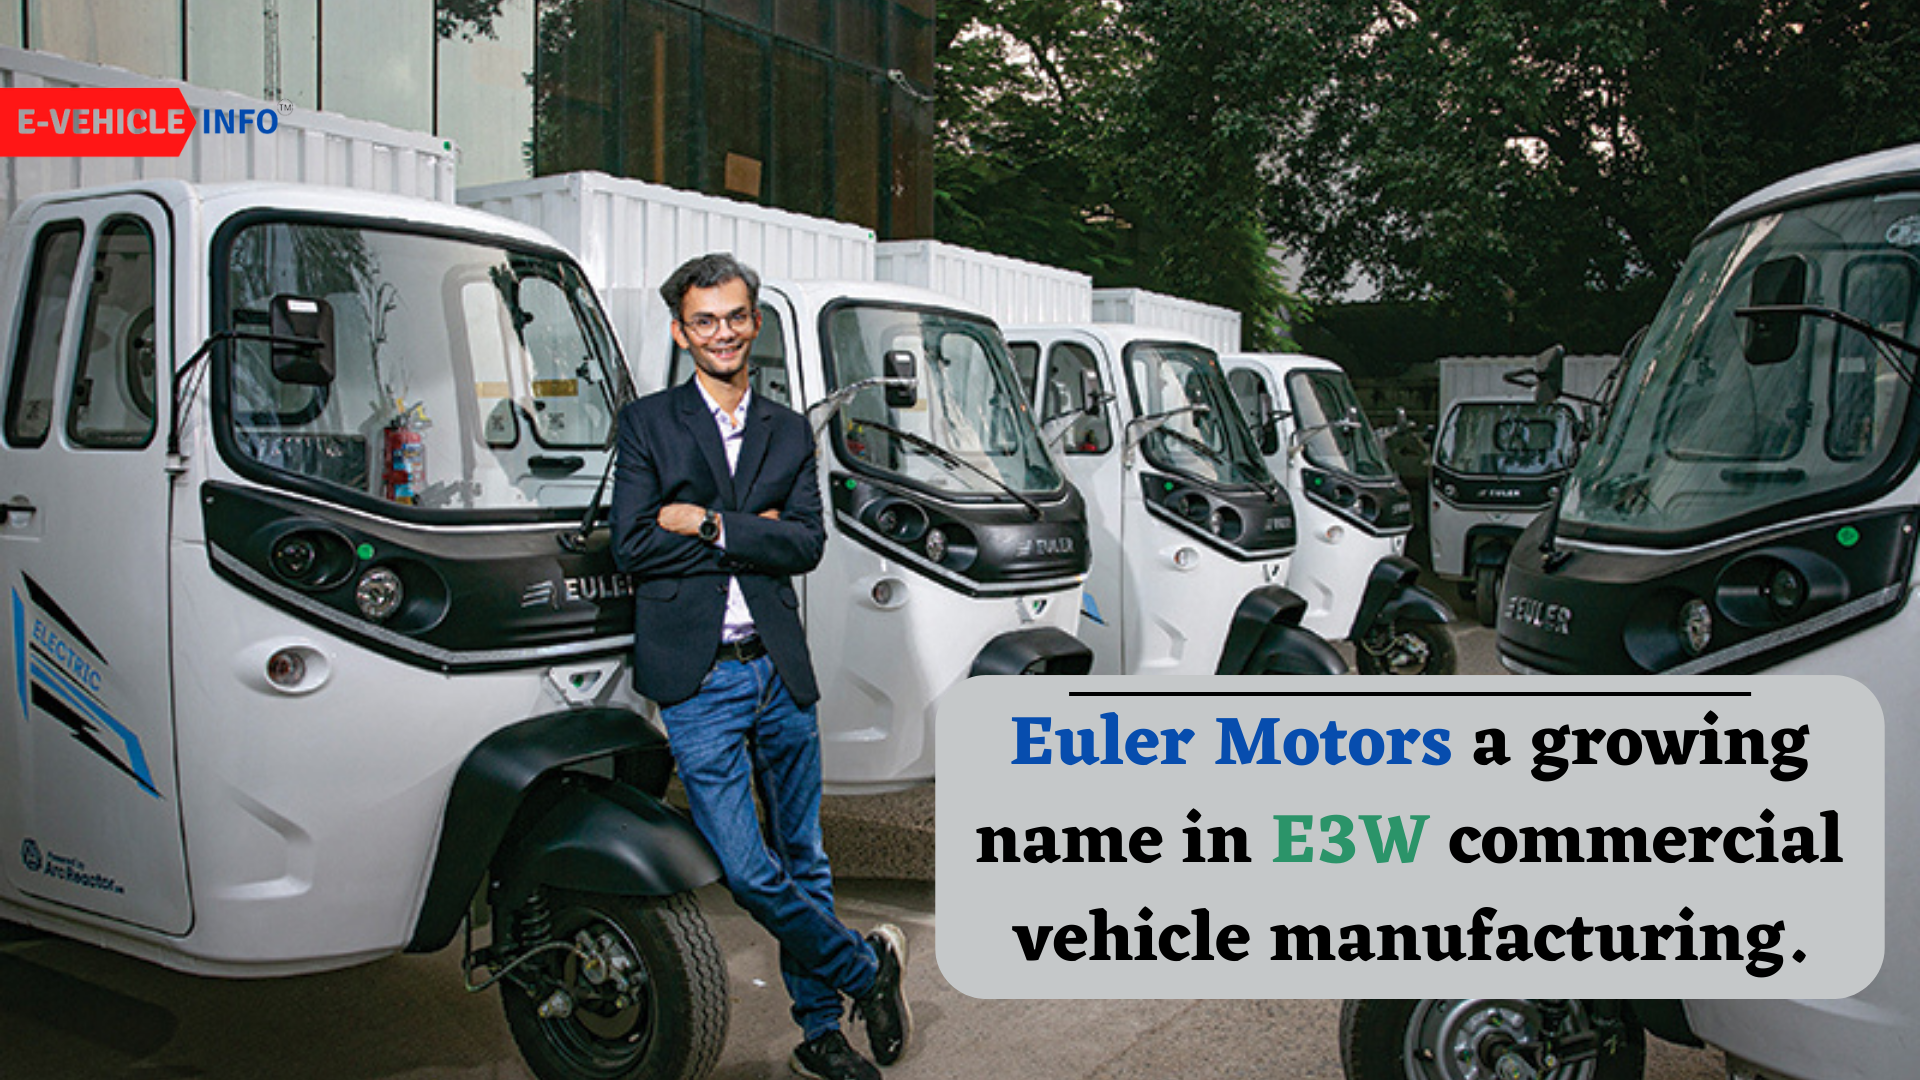 Euler Motors; a Growing name in E3W Commercial Vehicle Manufacturing